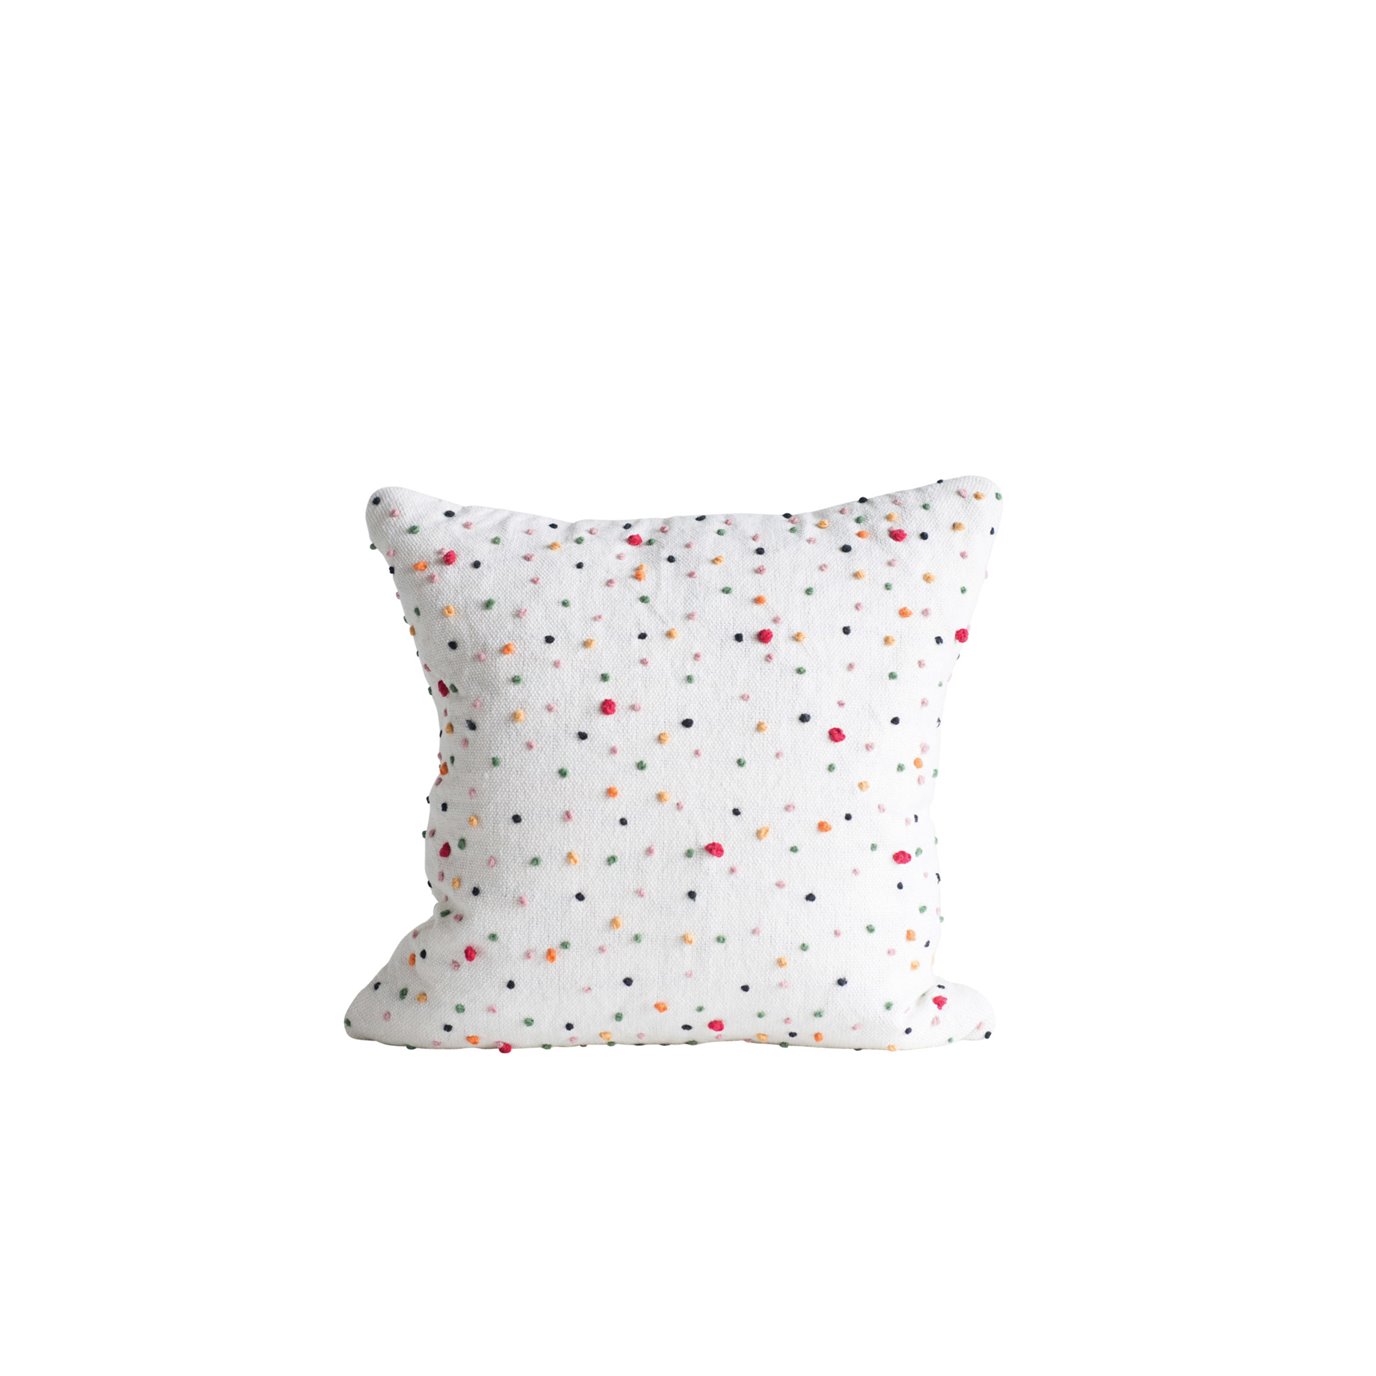 Square White Cotton Pillow with Multicolor Polka Dots & French Knots